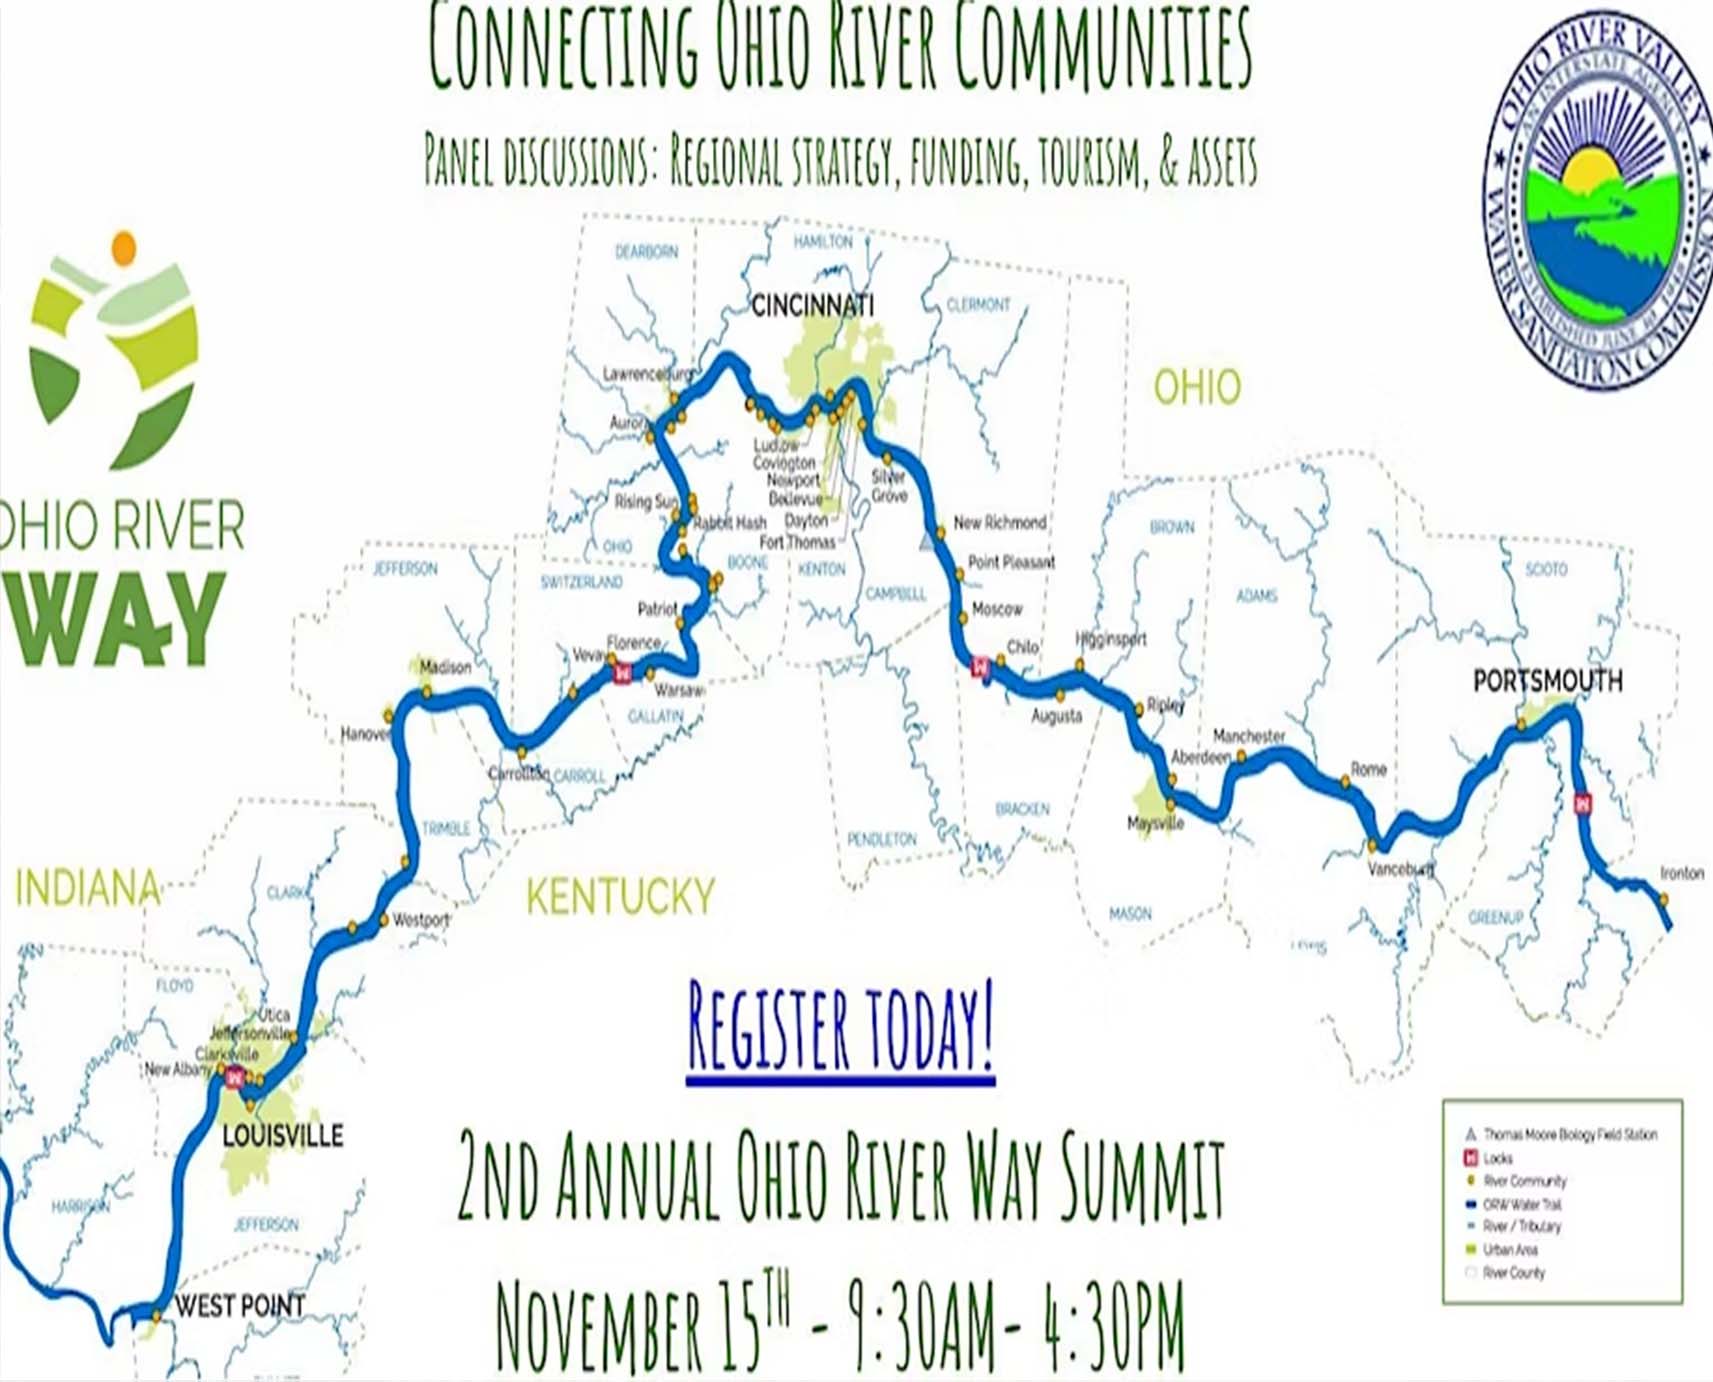 2nd Annual Ohio River Way Summit- Presented by Friendship State Bank